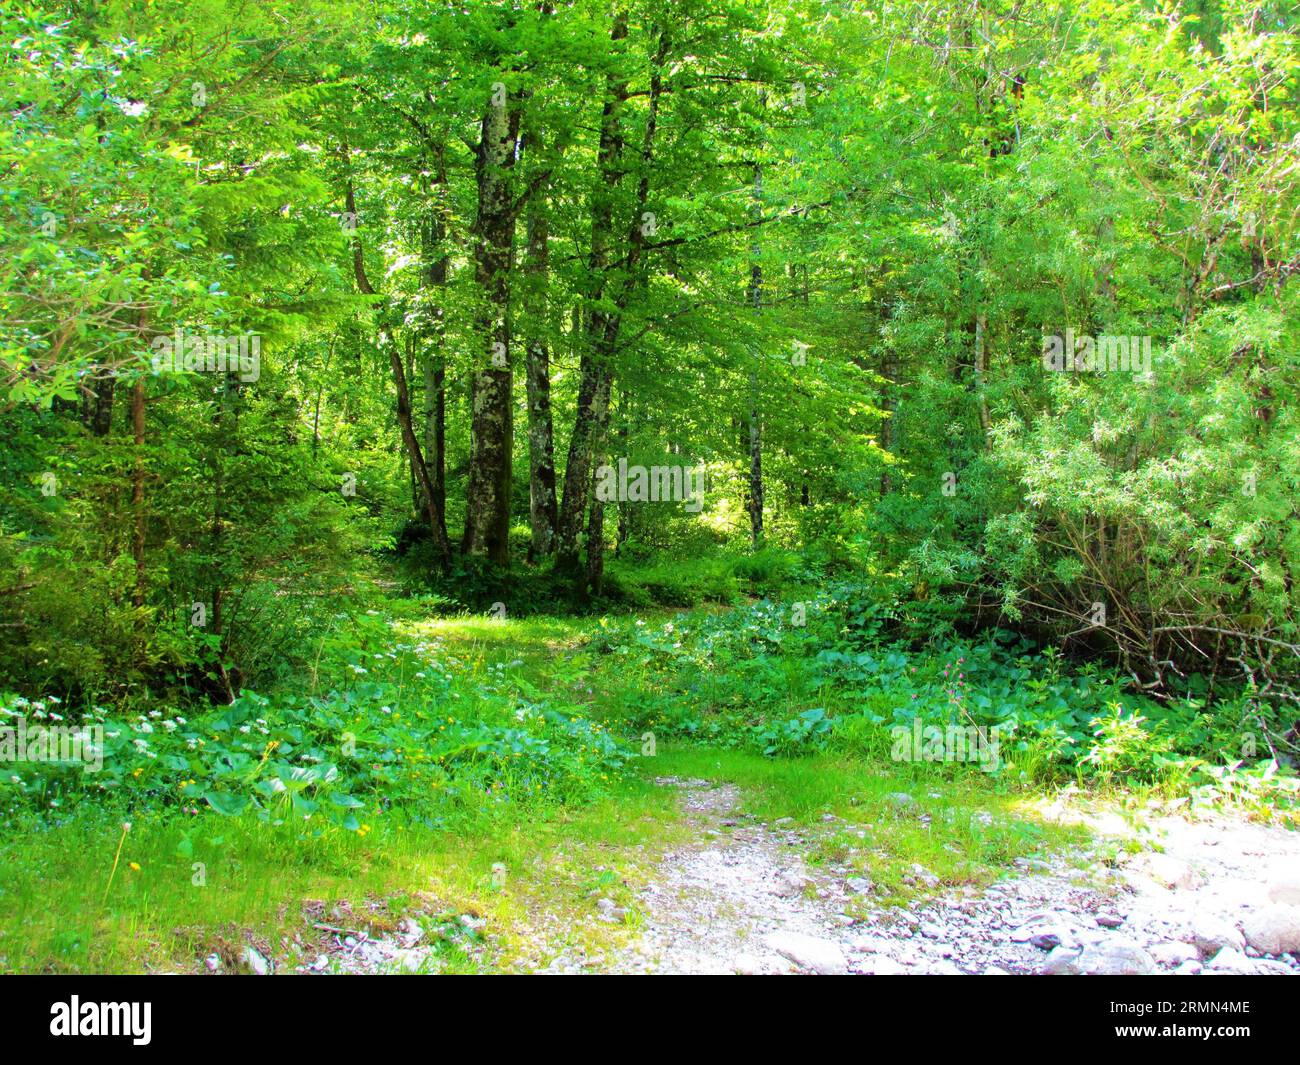 Forest of beech and white willow trees in Slovenia with butterbur (Petasites) vegetation in front Stock Photo